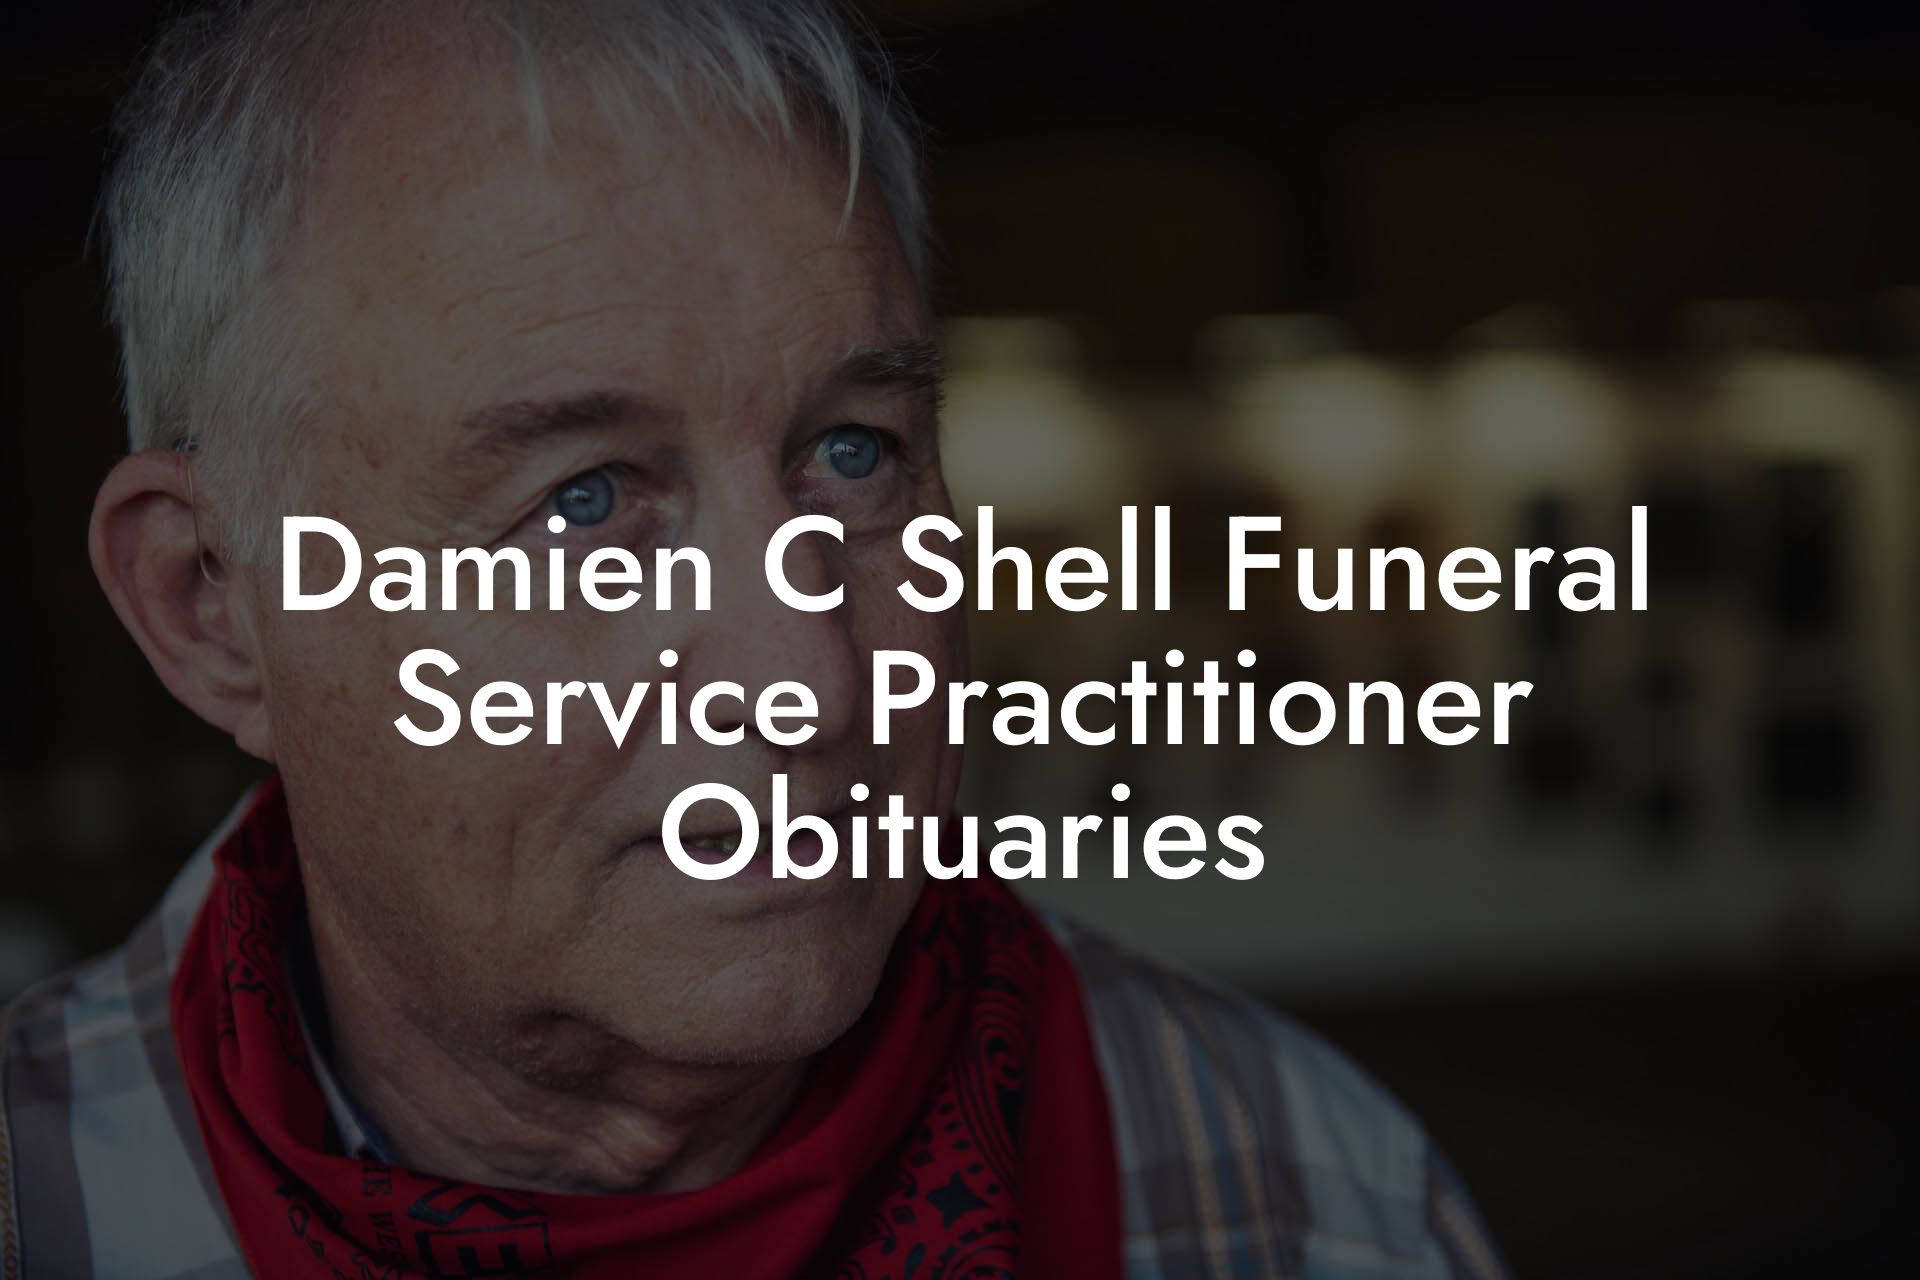 Damien C Shell Funeral Service Practitioner Obituaries